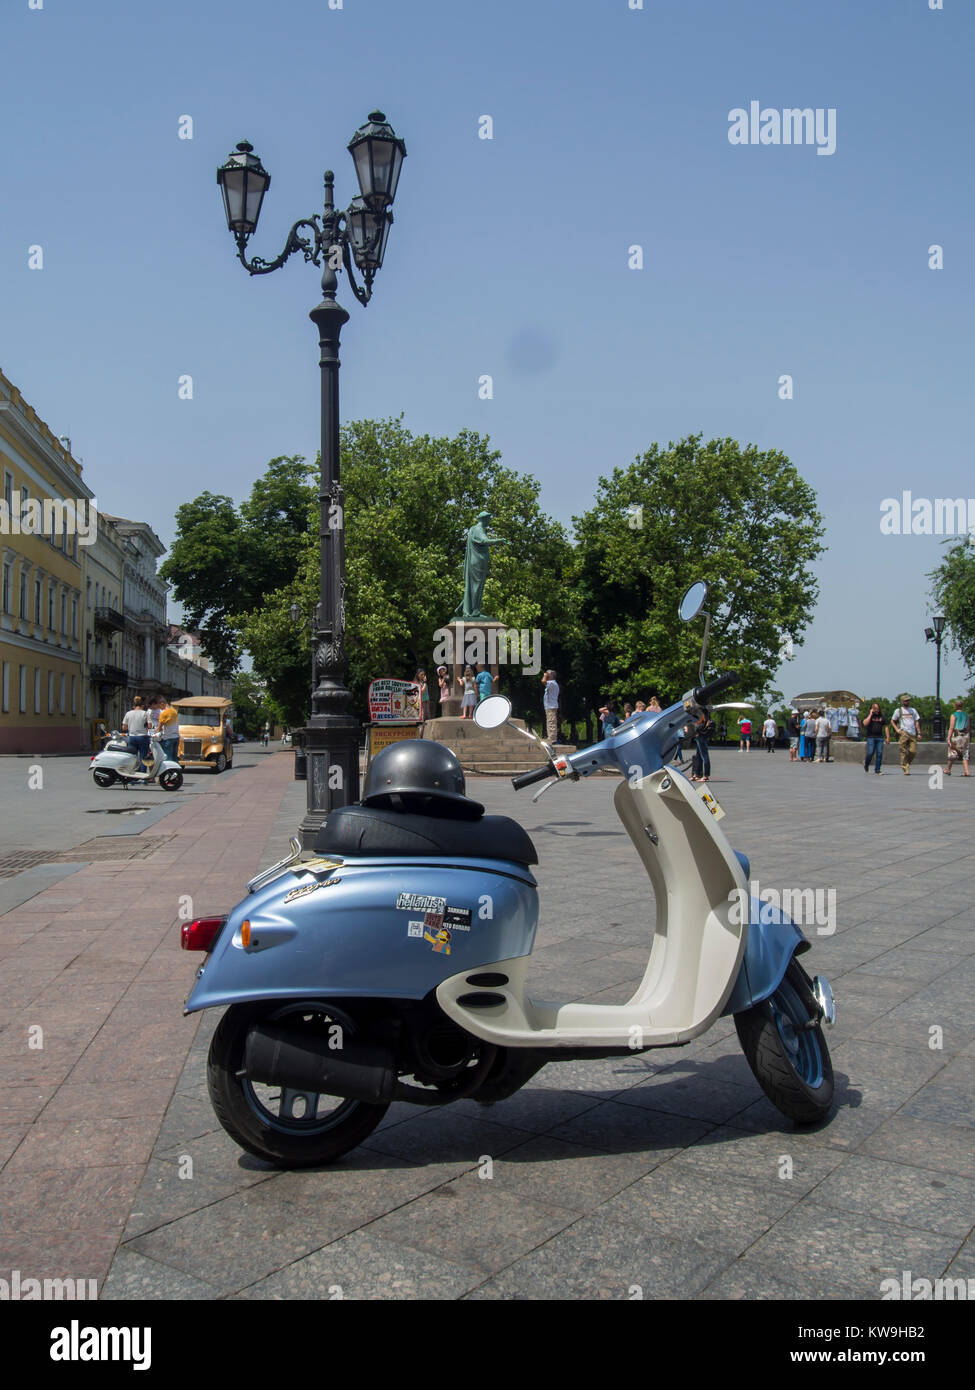 ODESSA, UKRAINE - JUNE 18, 2016:  Scooter on Prymorskyi Blvd with Statue of the Duc de Richelieu in the background Stock Photo